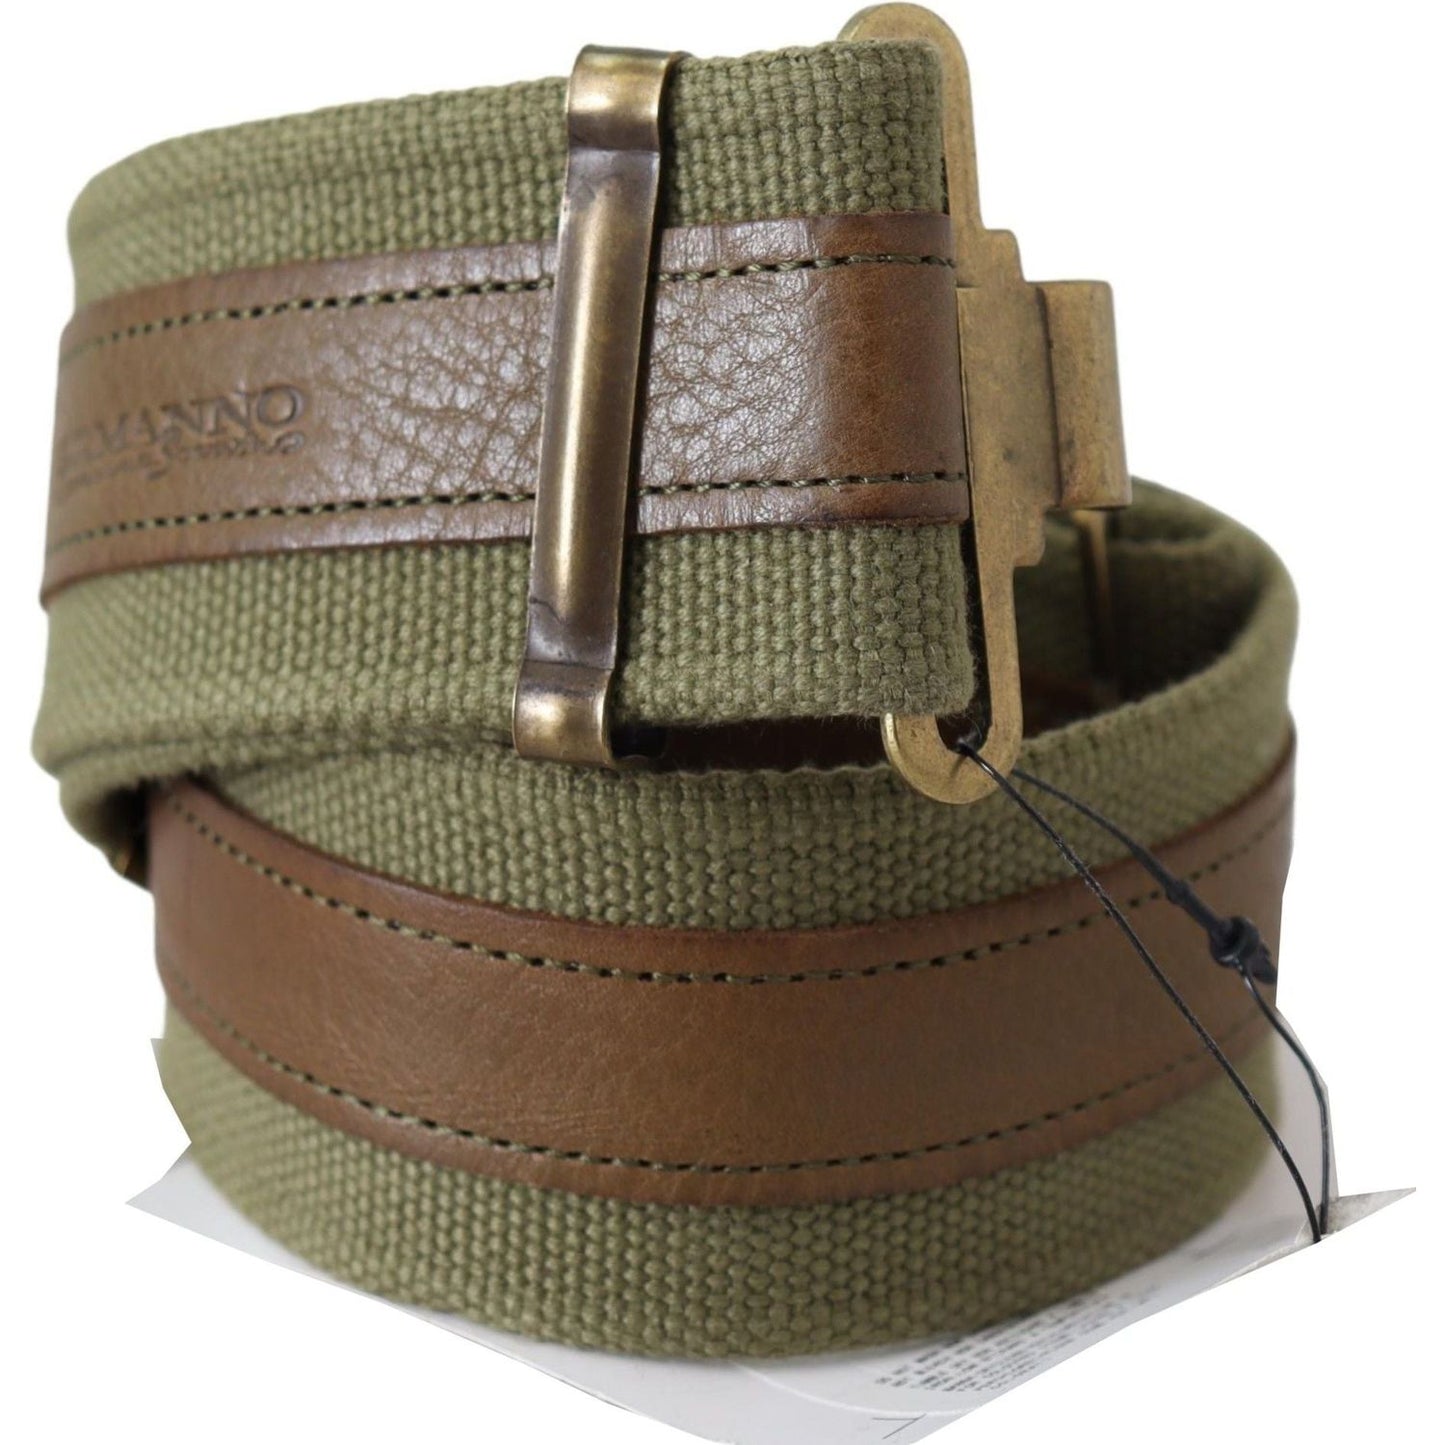 Ermanno Scervino Chic Army Green Rustic Belt Belt green-leather-rustic-bronze-buckle-army-belt